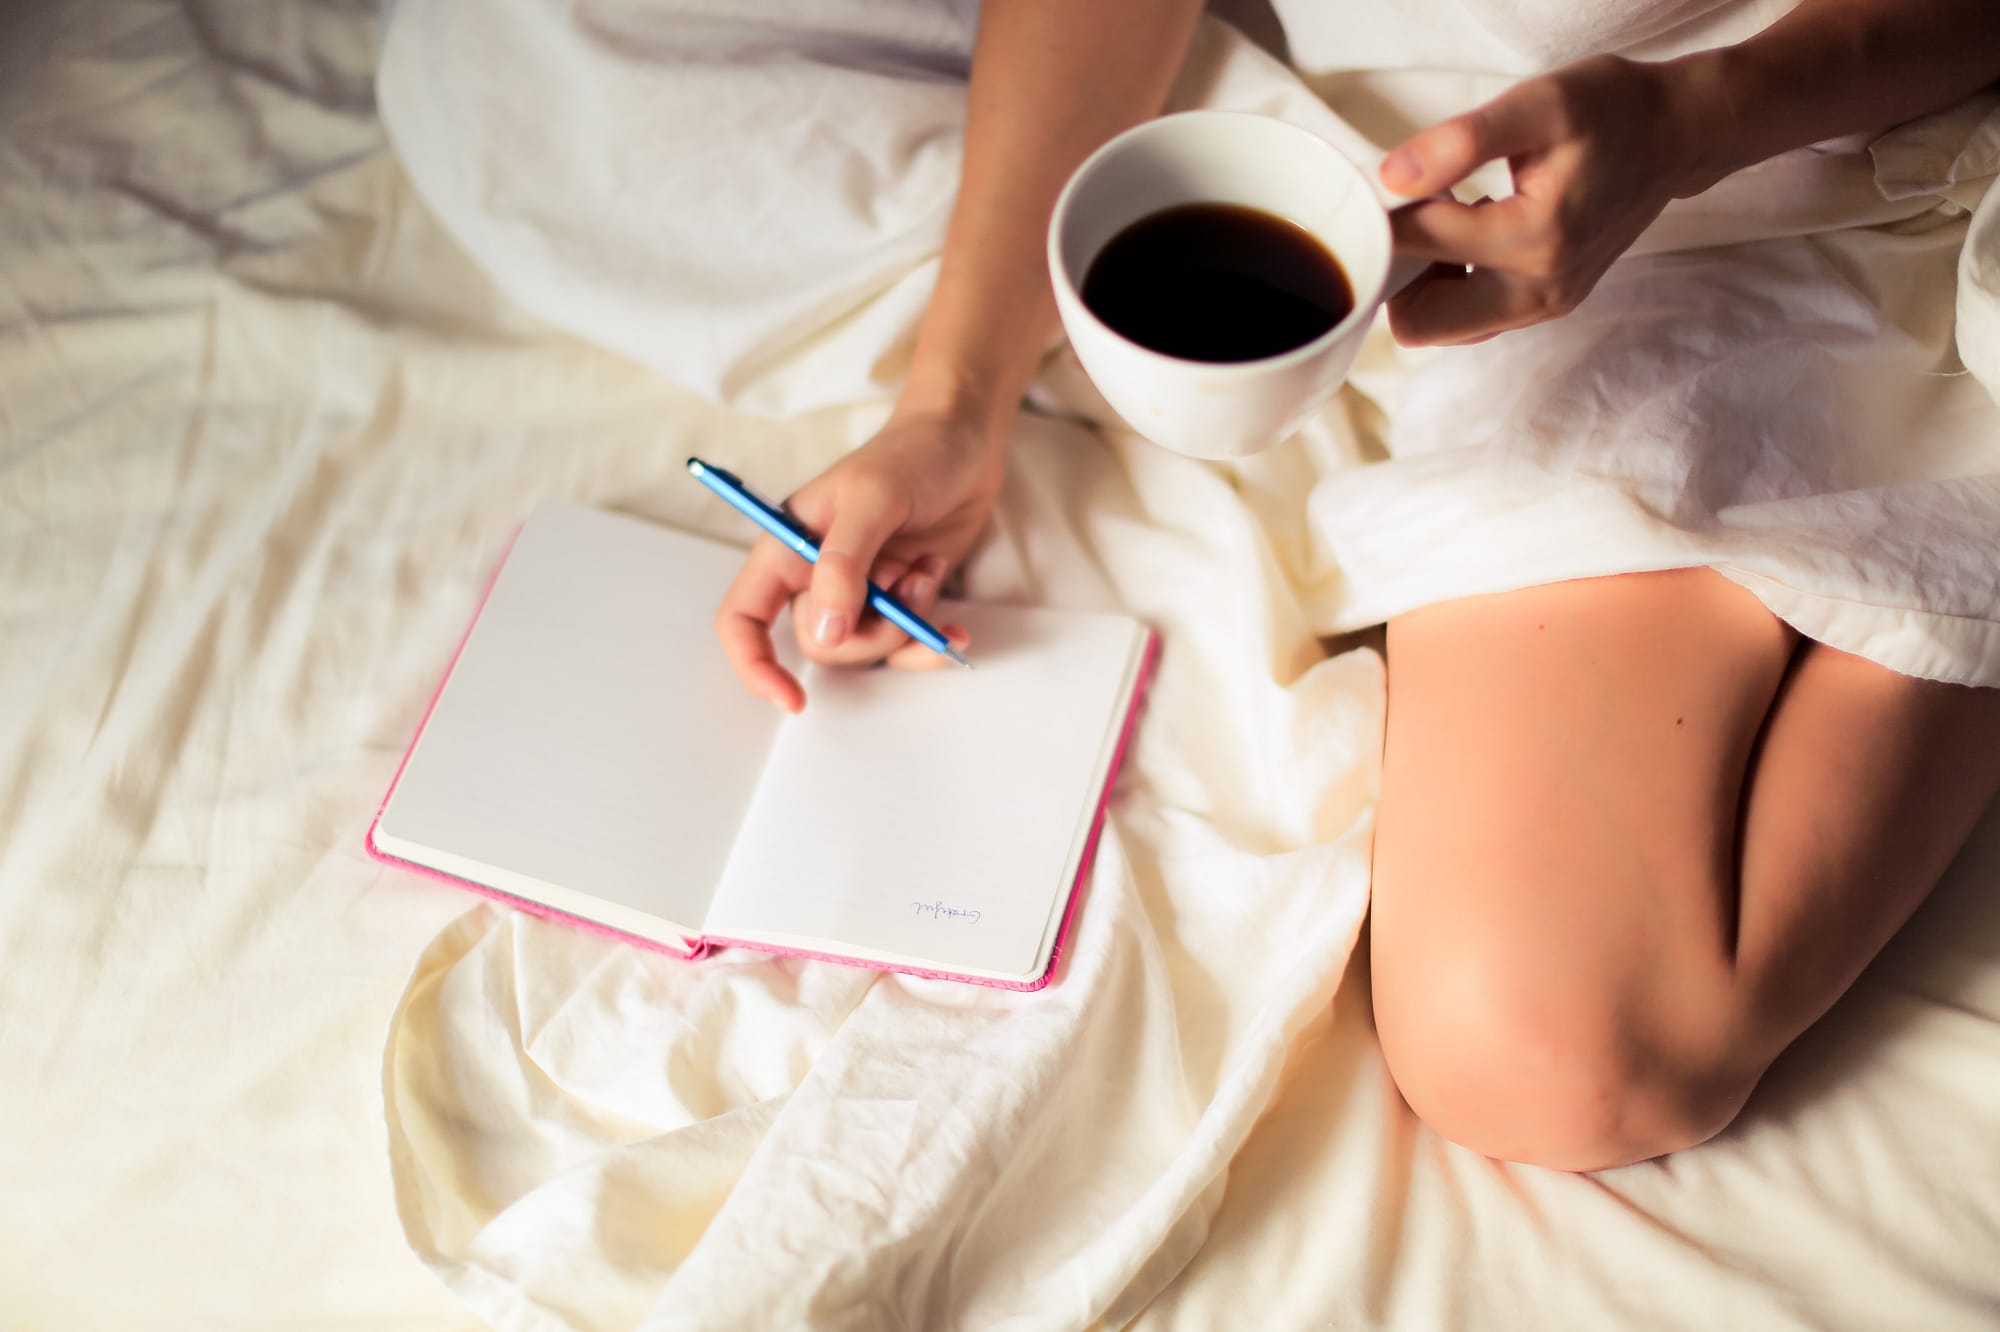 journaling is a great form of self-care to decrease anxiety from covid-19